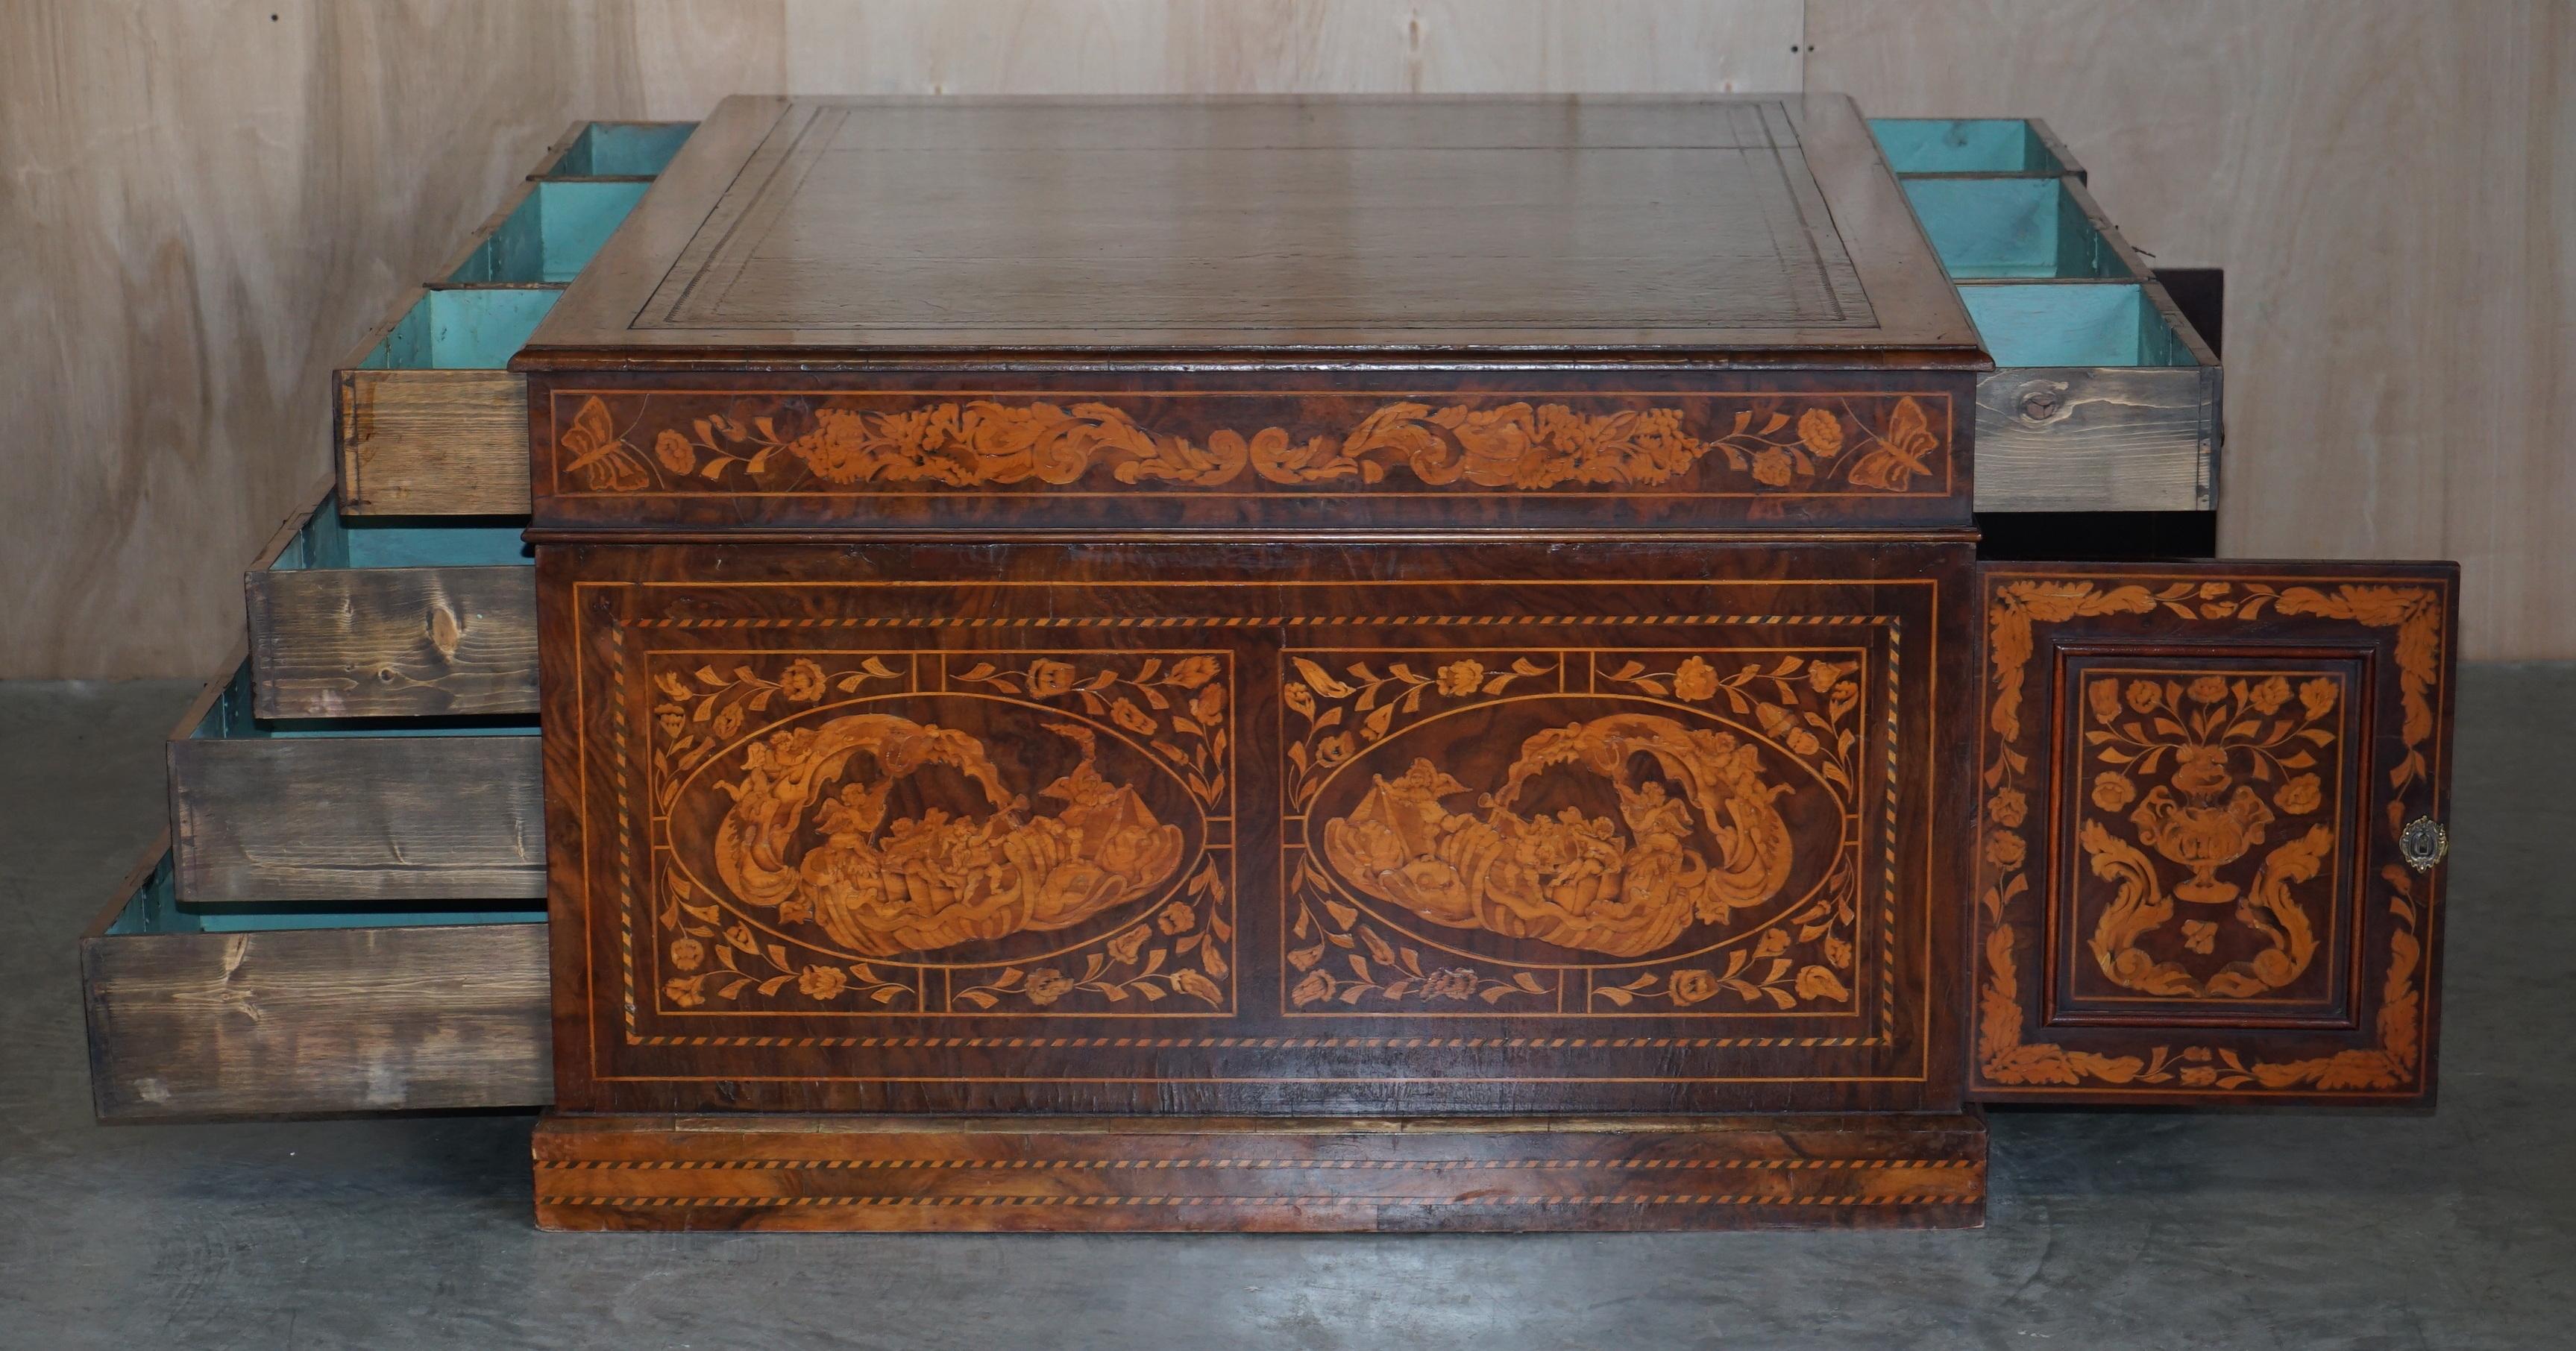 Antique Restored Dutch Marquetry Inlaid Double Sided Twin Pedestal Partners Desk For Sale 11